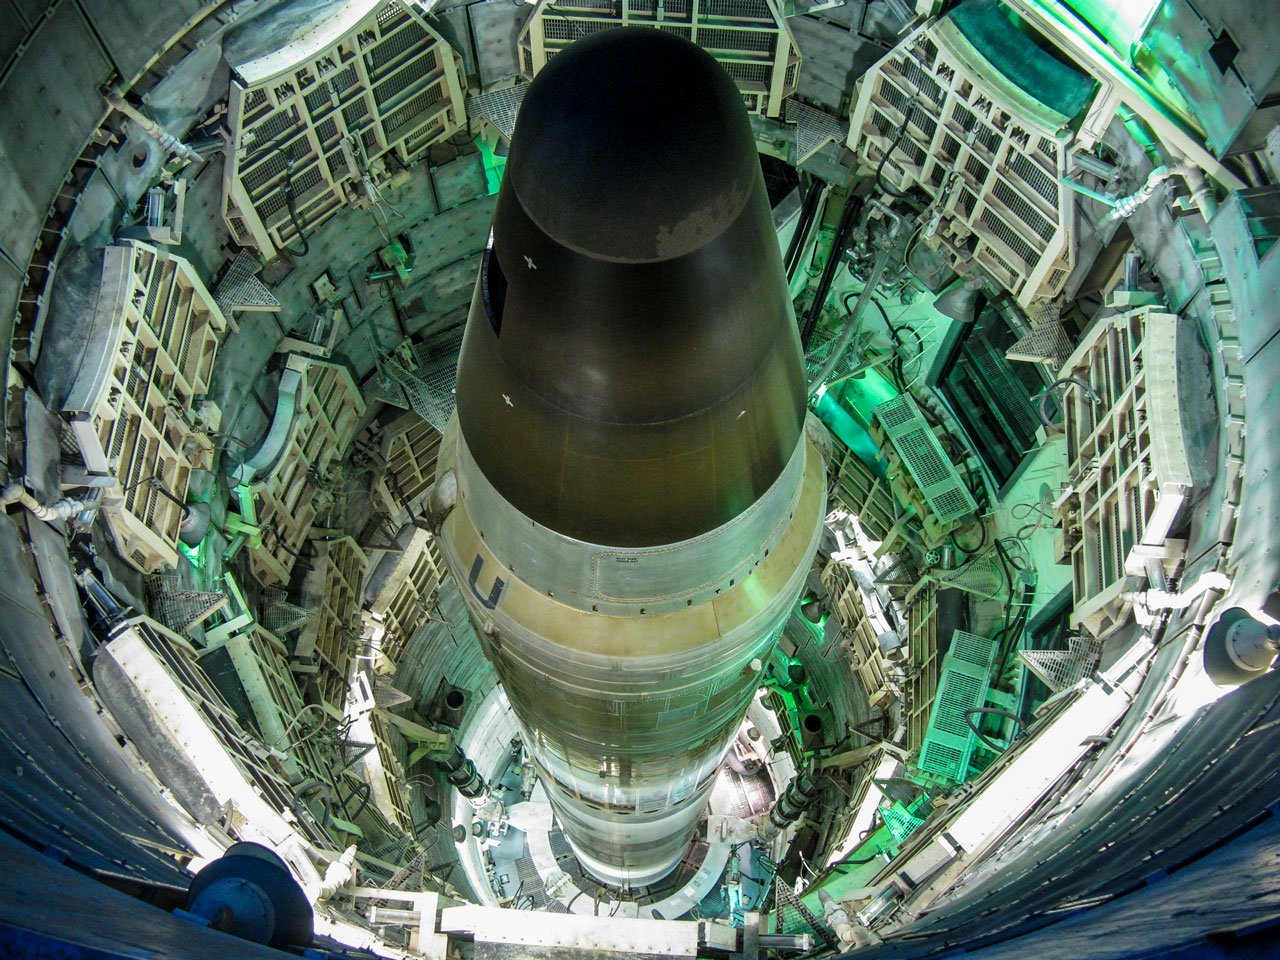 Trust but verify: Can the U.S. certify new nuclear weapons without detonating them?